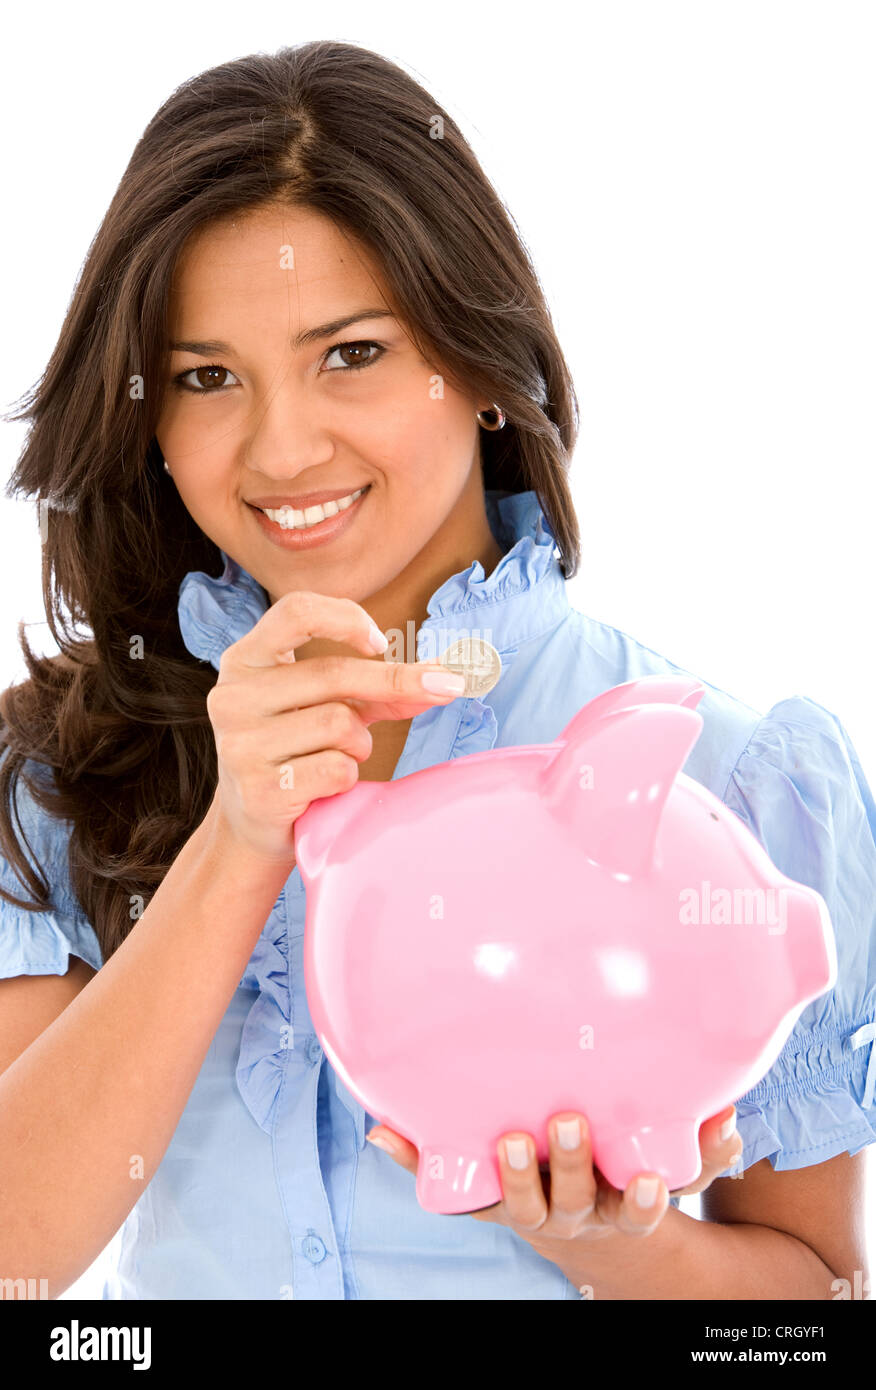 woman dropping a coin in a piggy bank Stock Photo